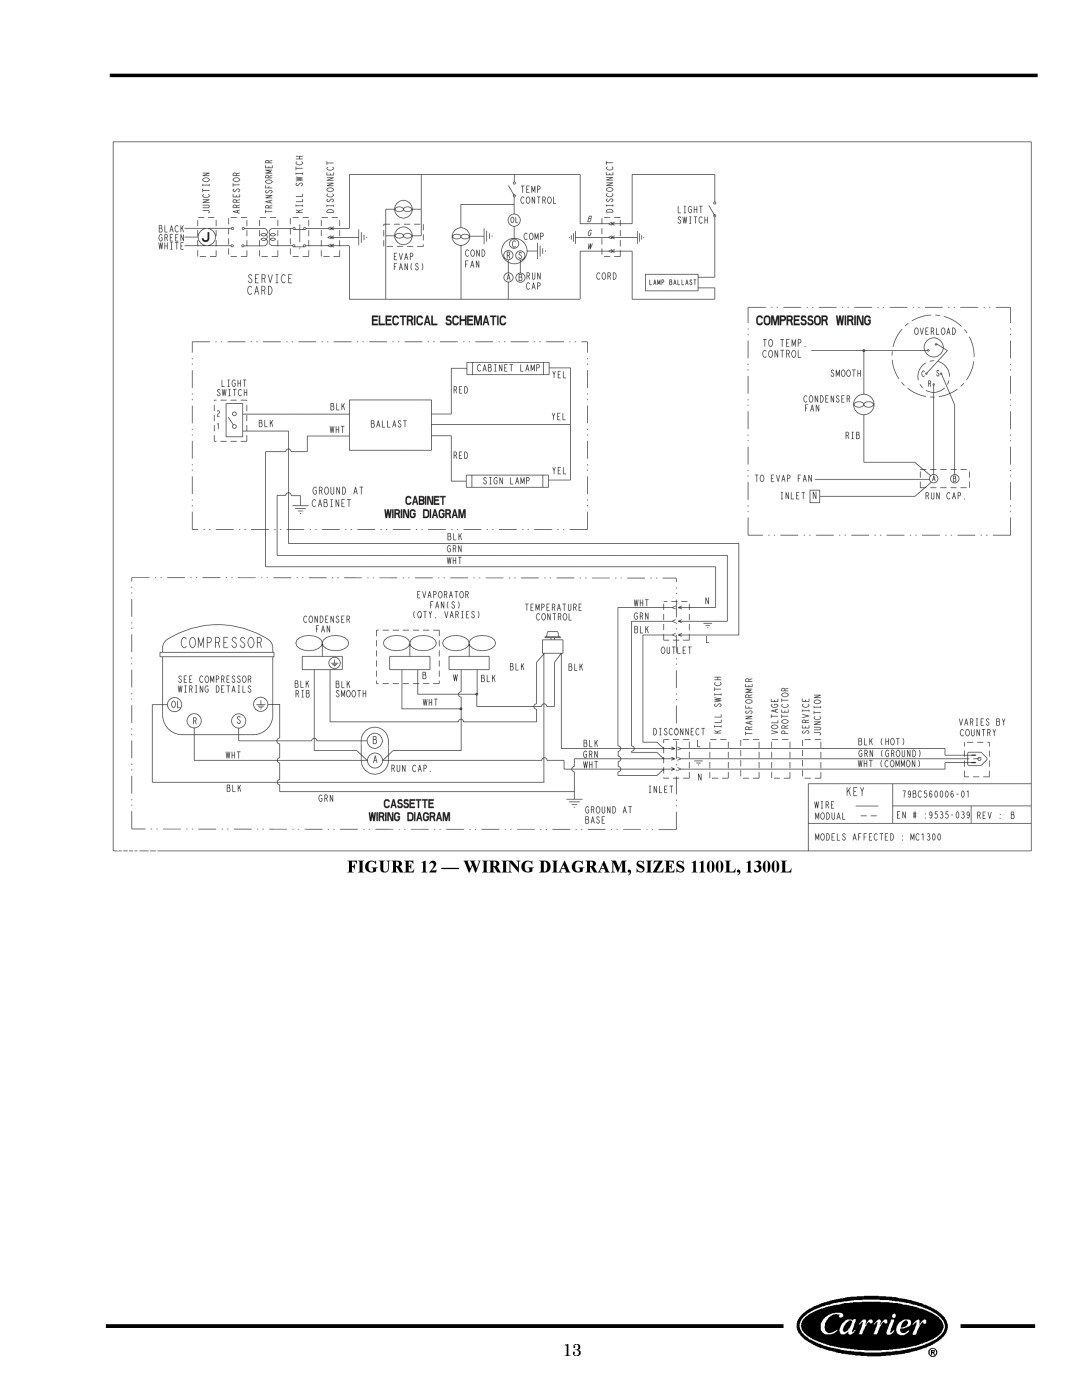 Carrier 260L owner manual WIRING DIAGRAM, SIZES 1100L, 1300L, a79-11 